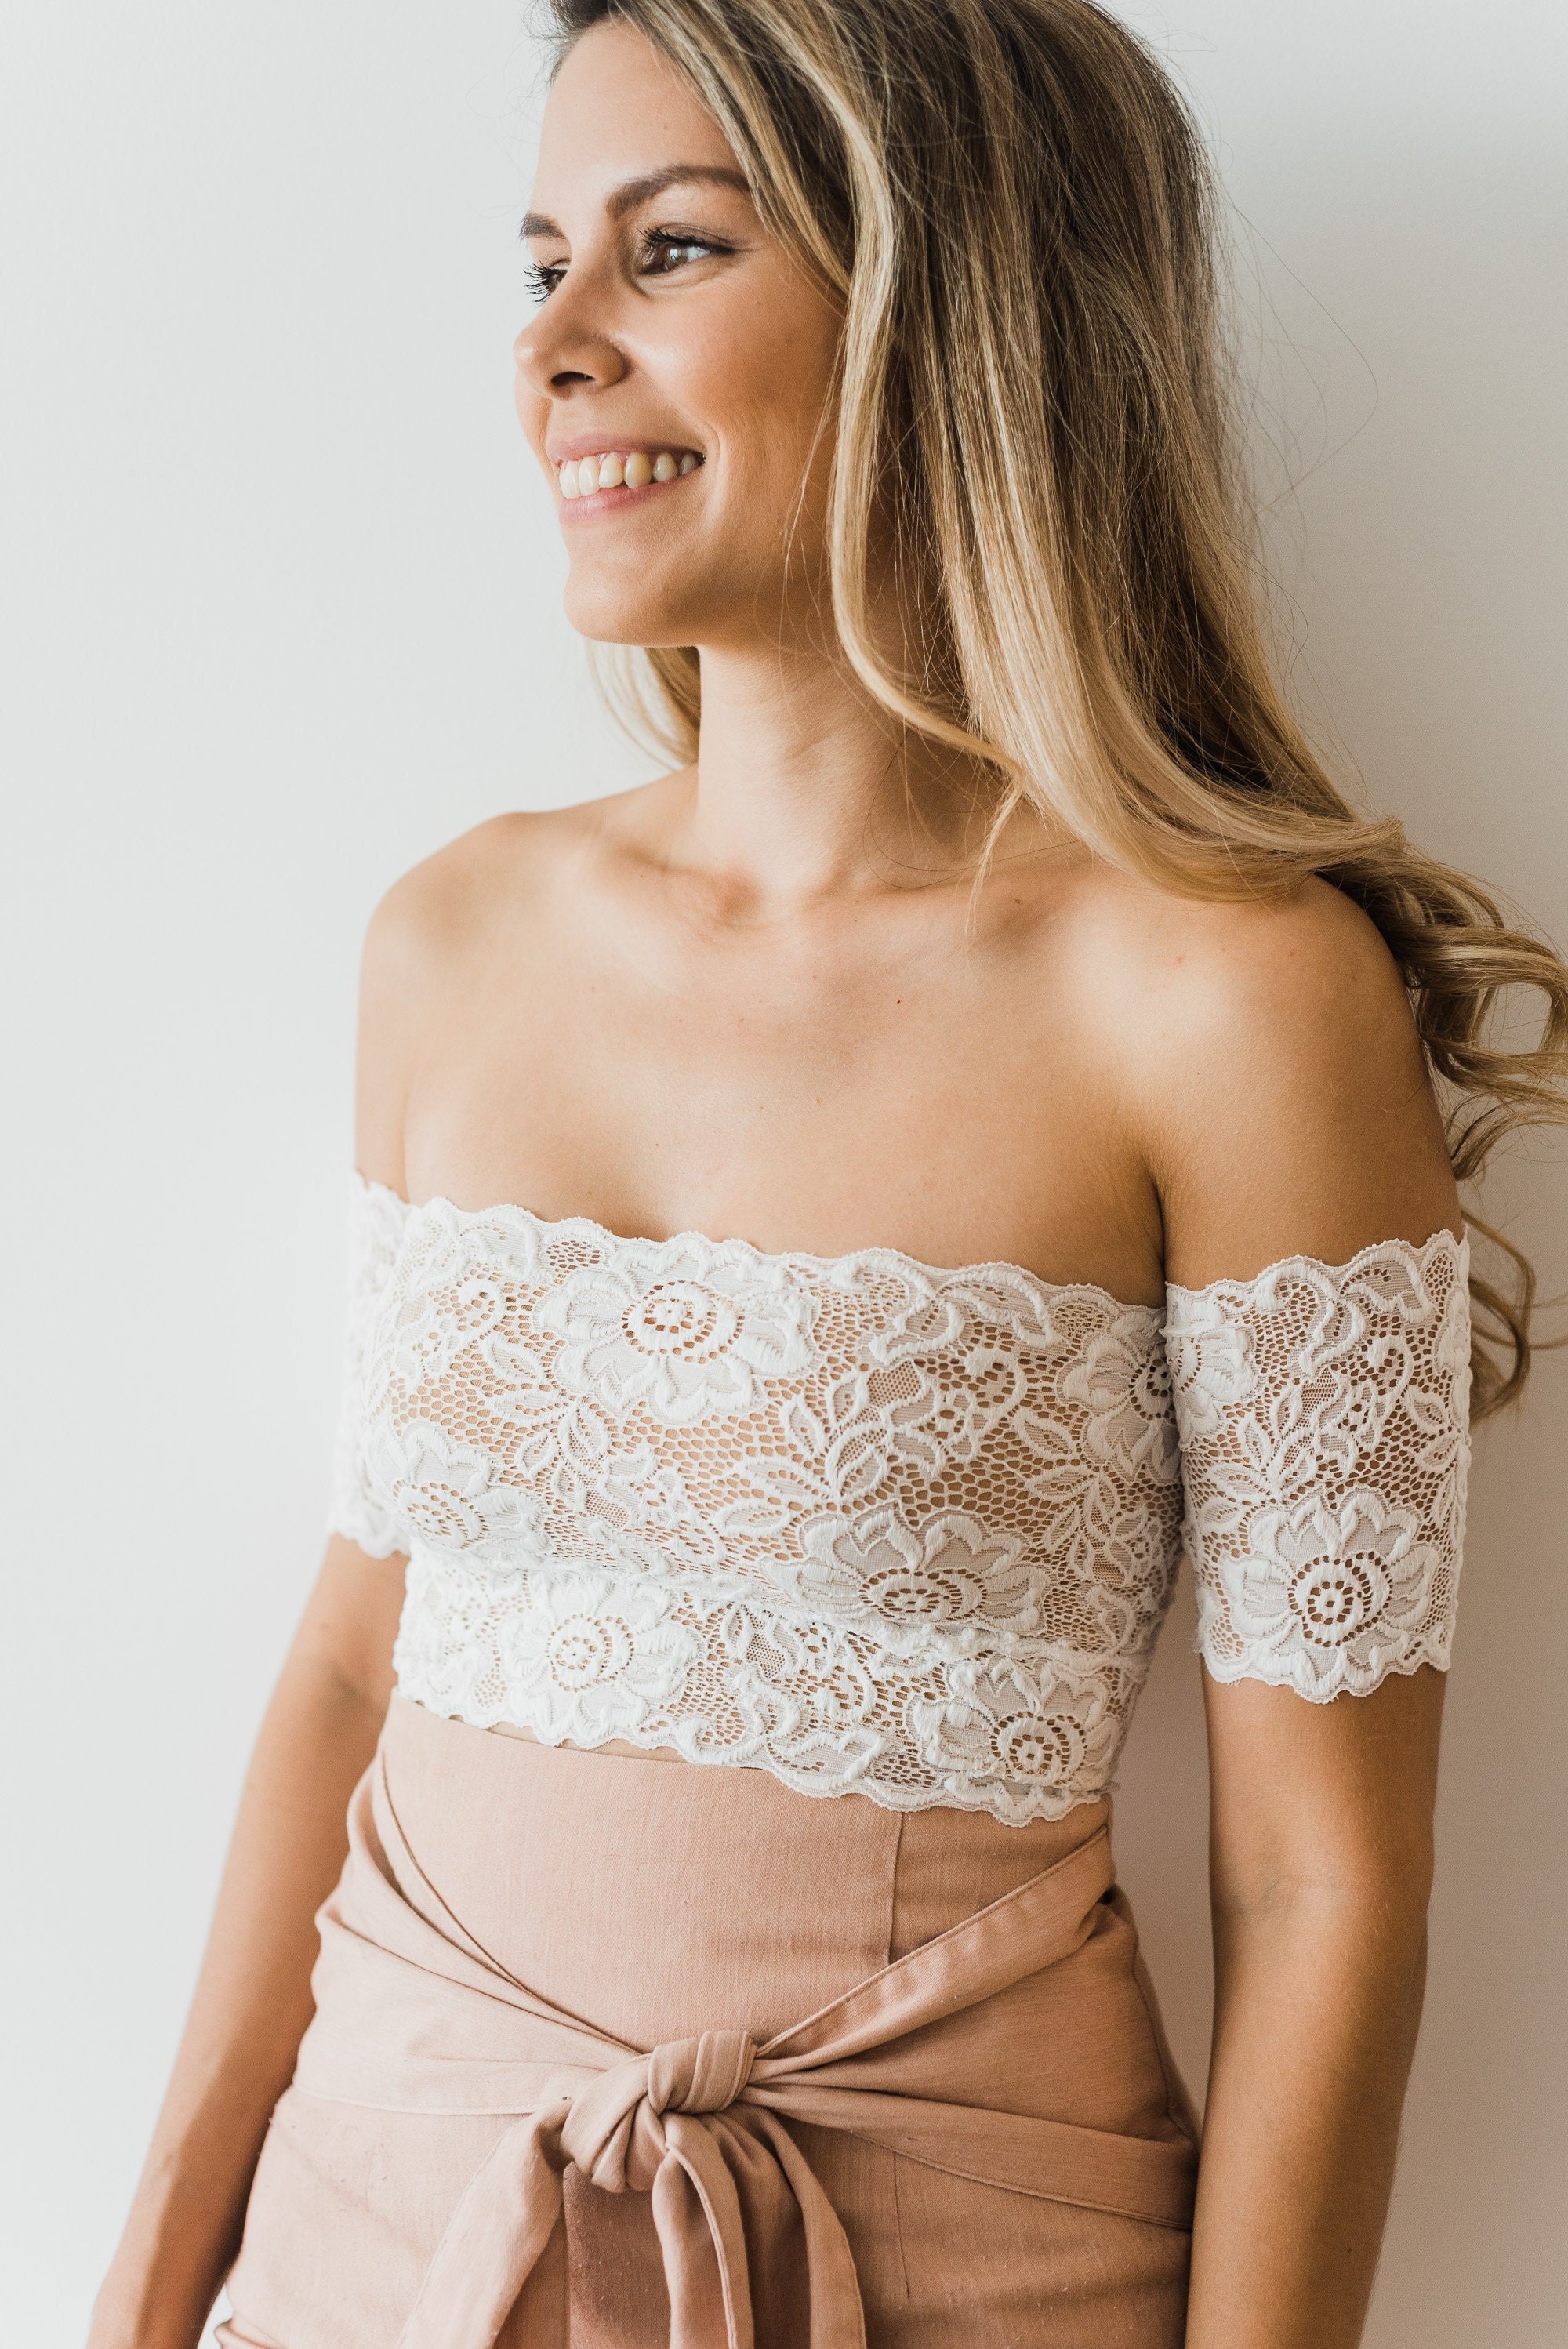 Bridal Lace Crop Top. off the Shoulder Lace Top for Wedding. White